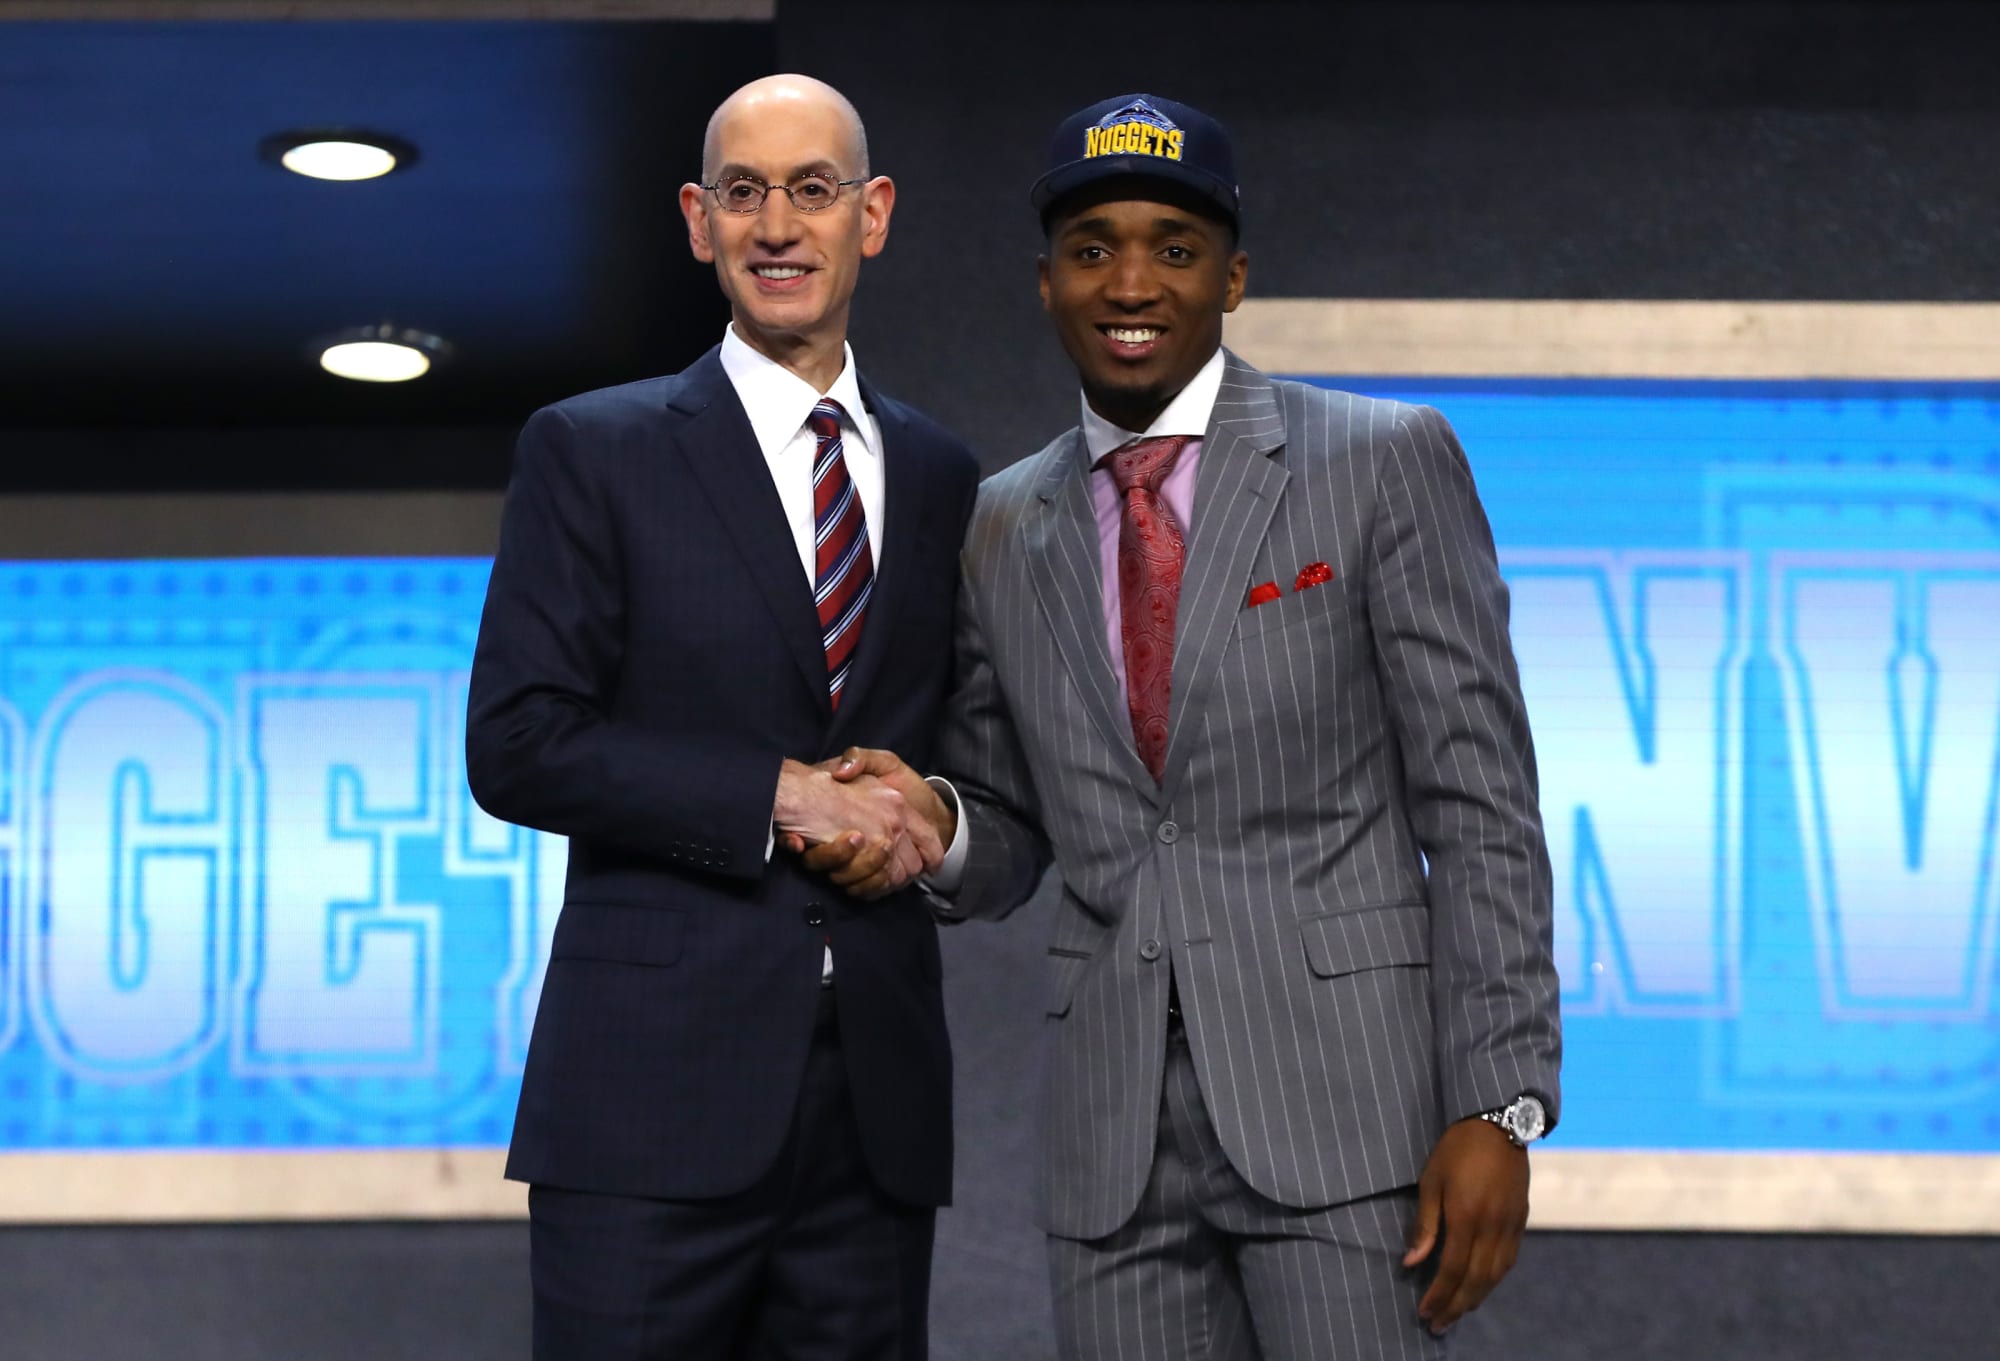 What 2023 NBA Draft prospects should the Utah Jazz tank for?